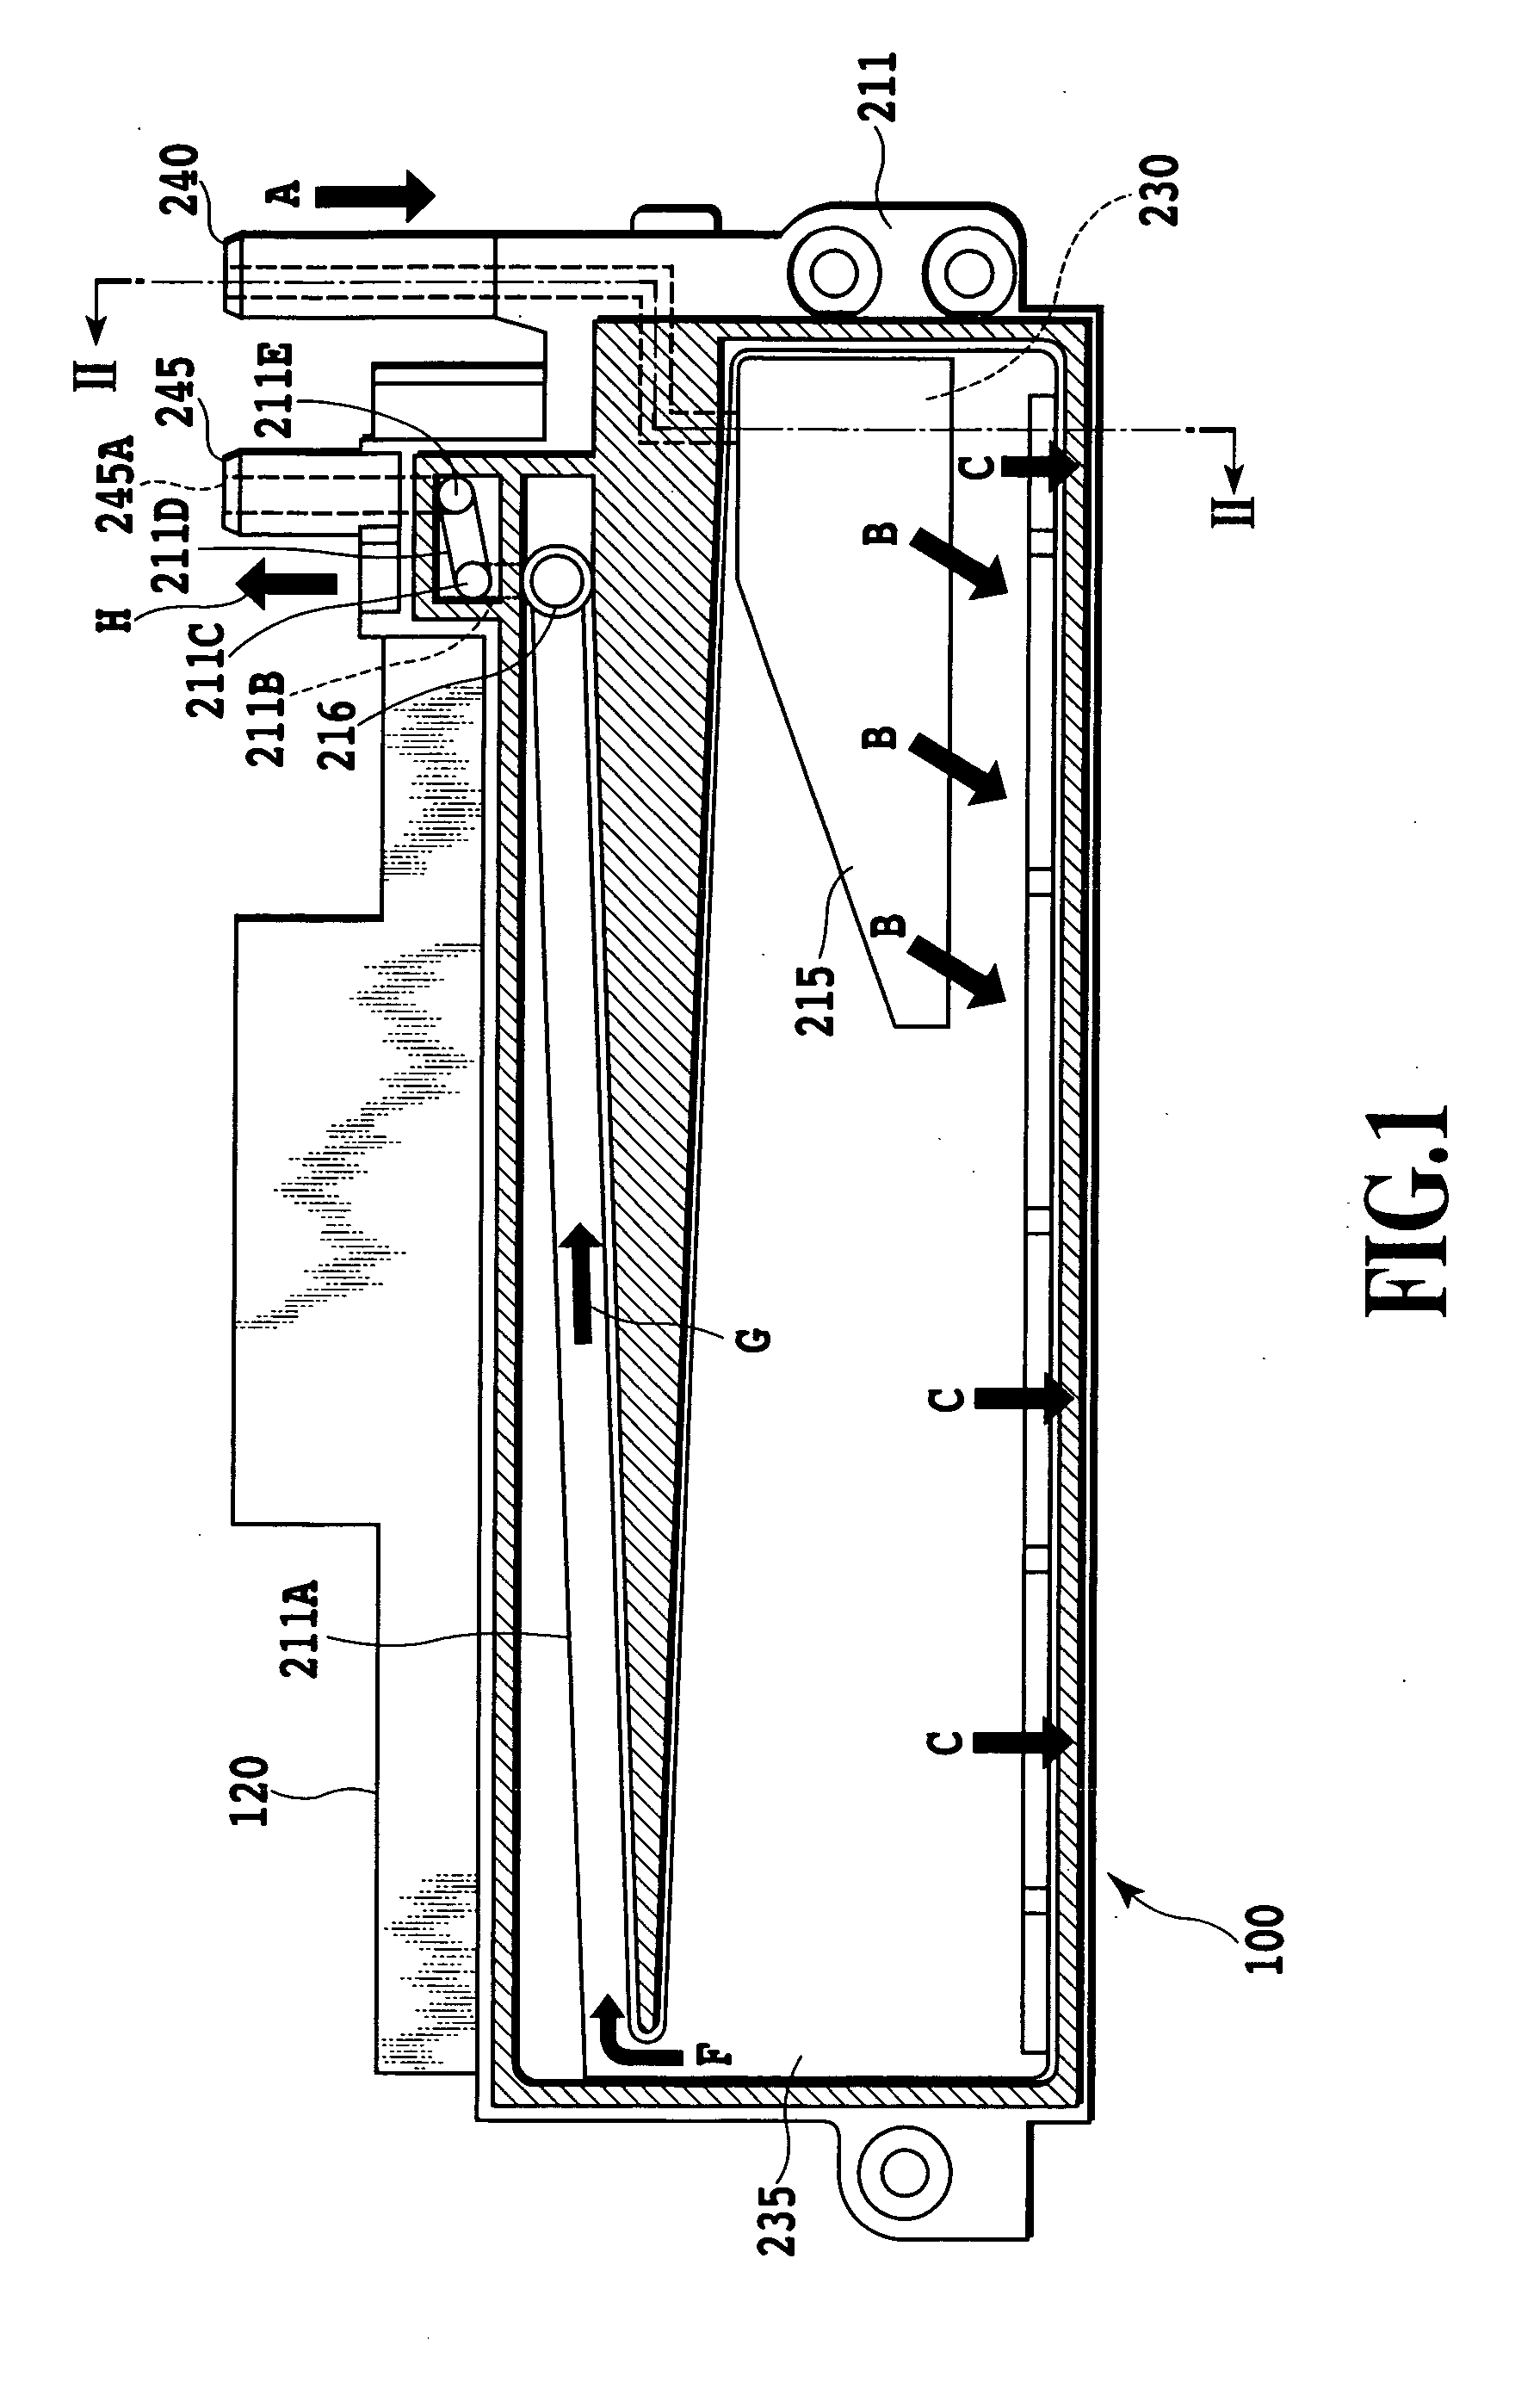 Ink jet print head, ink jet printing apparatus, and method for manufacturing ink jet print head